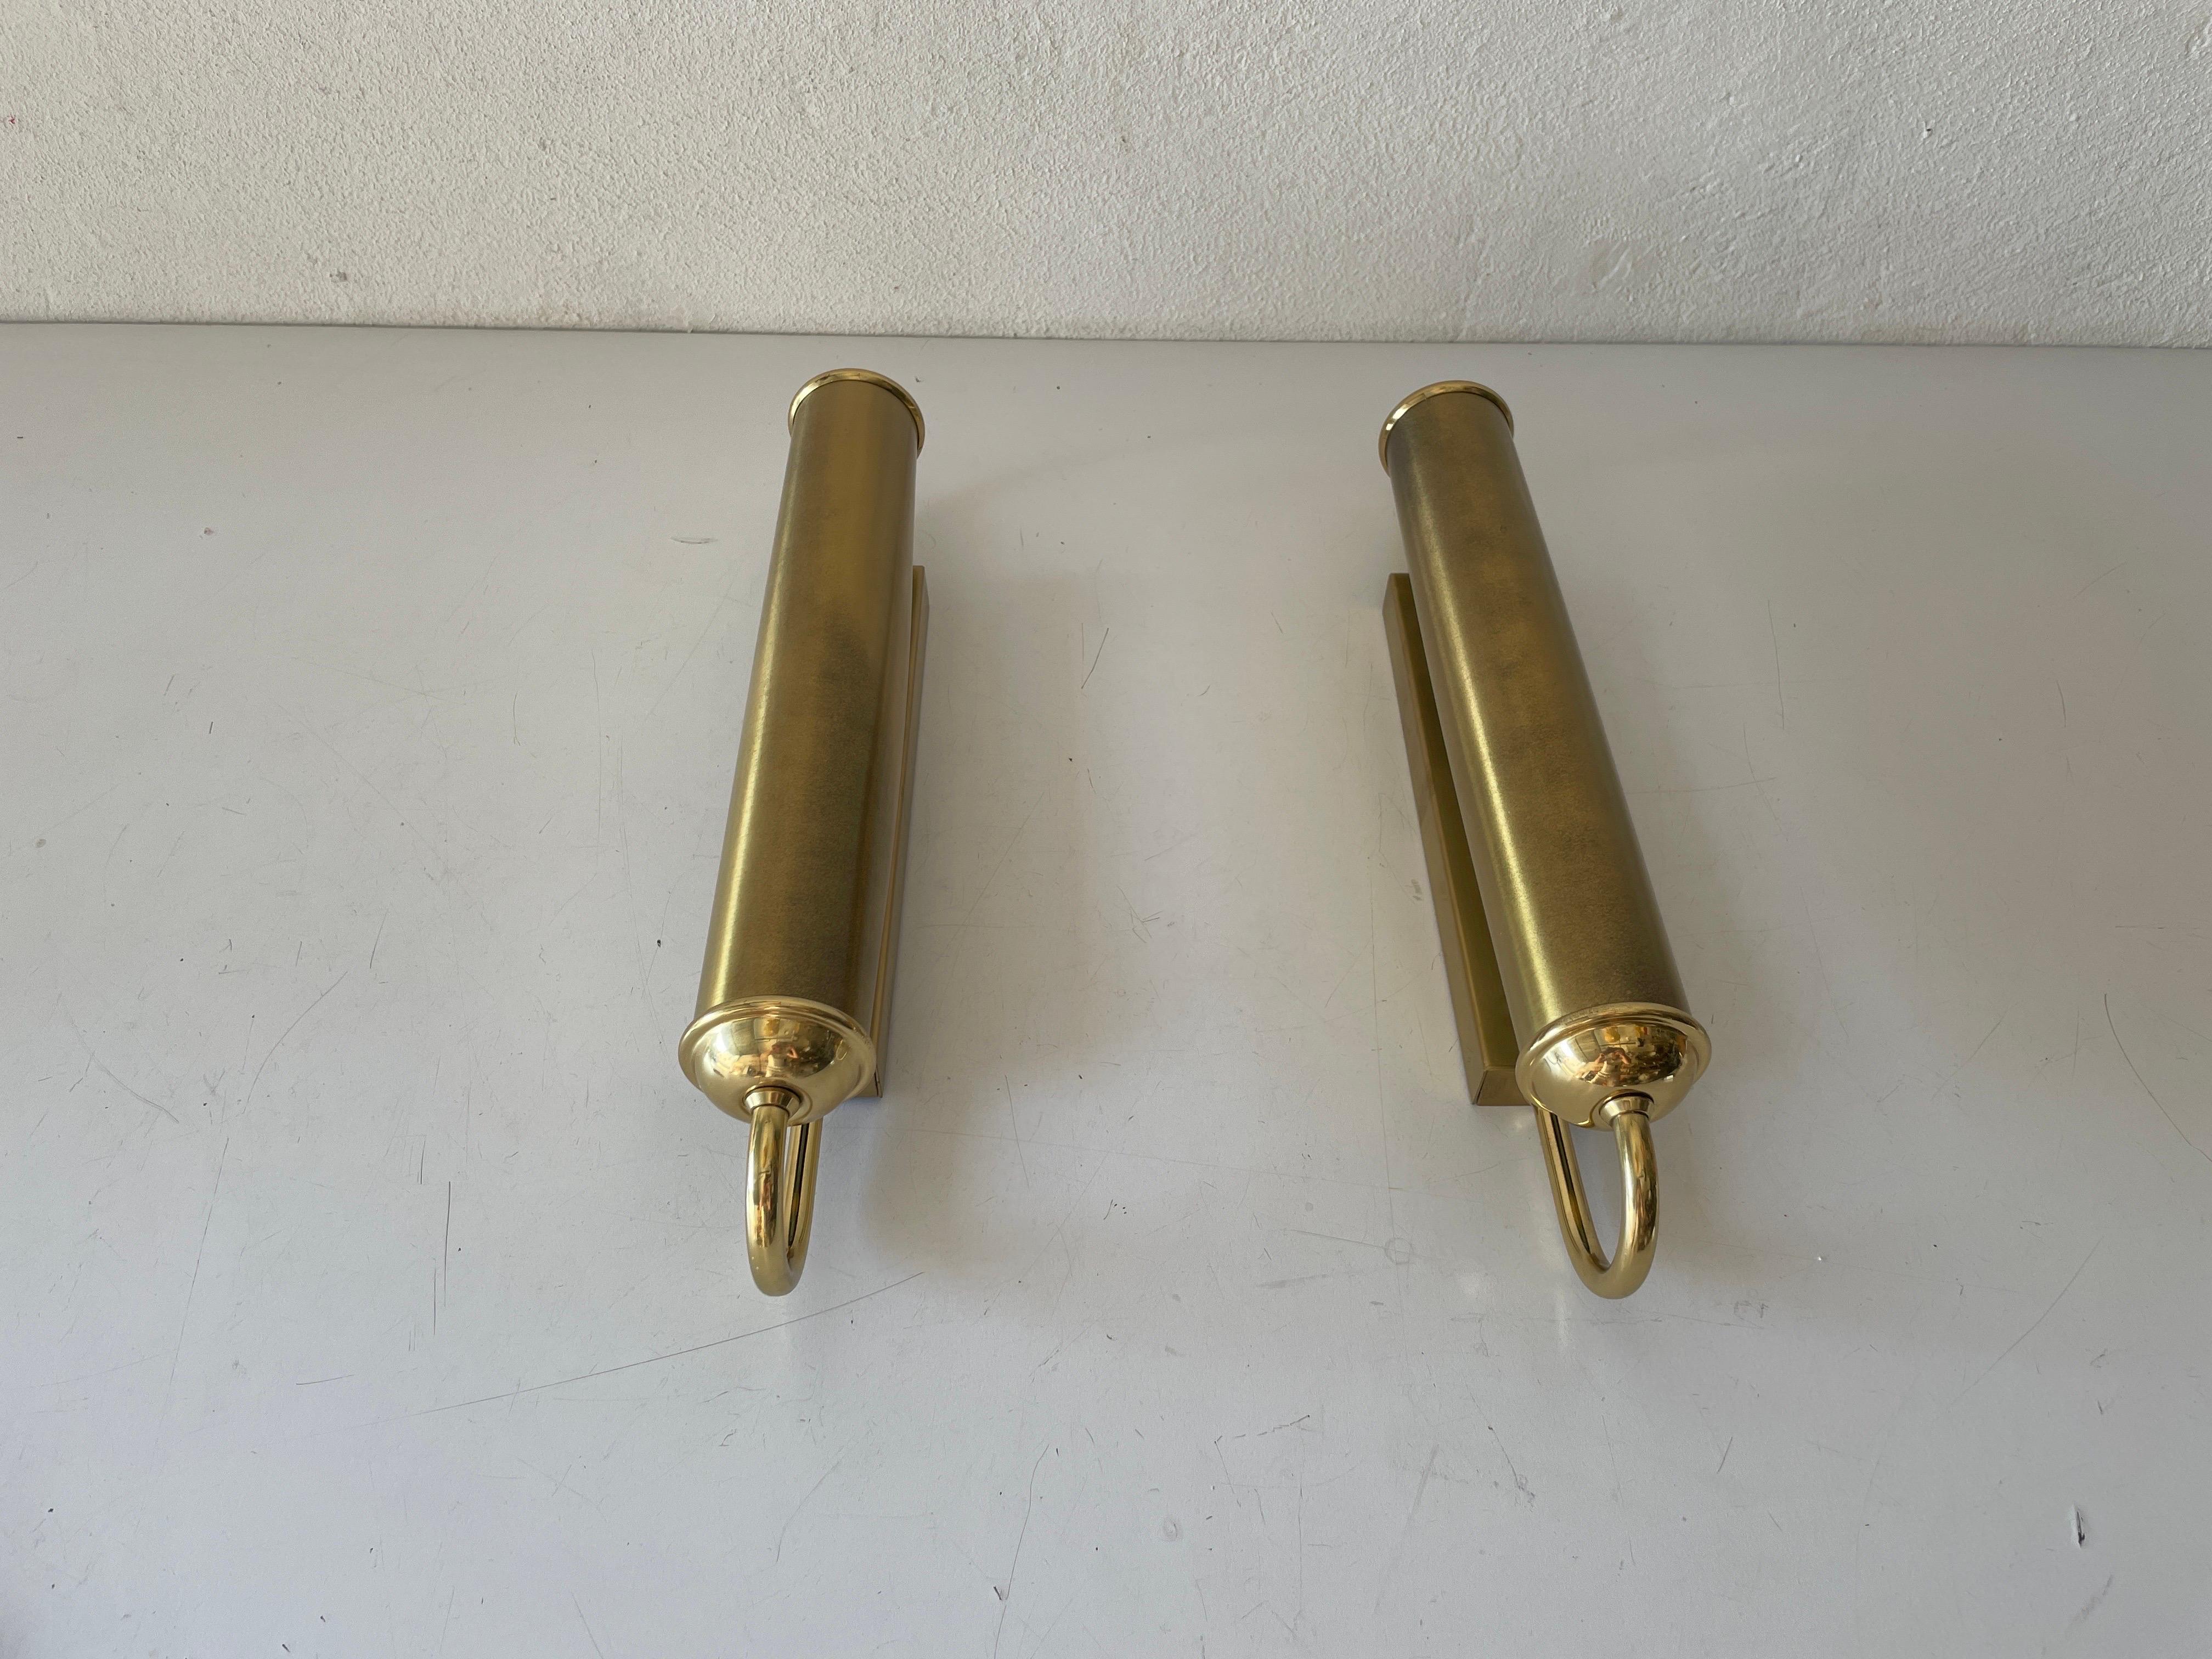 Space Age Cylindrical Design Art Deco Style Brass Pair of Sconces, 1960s, Germany